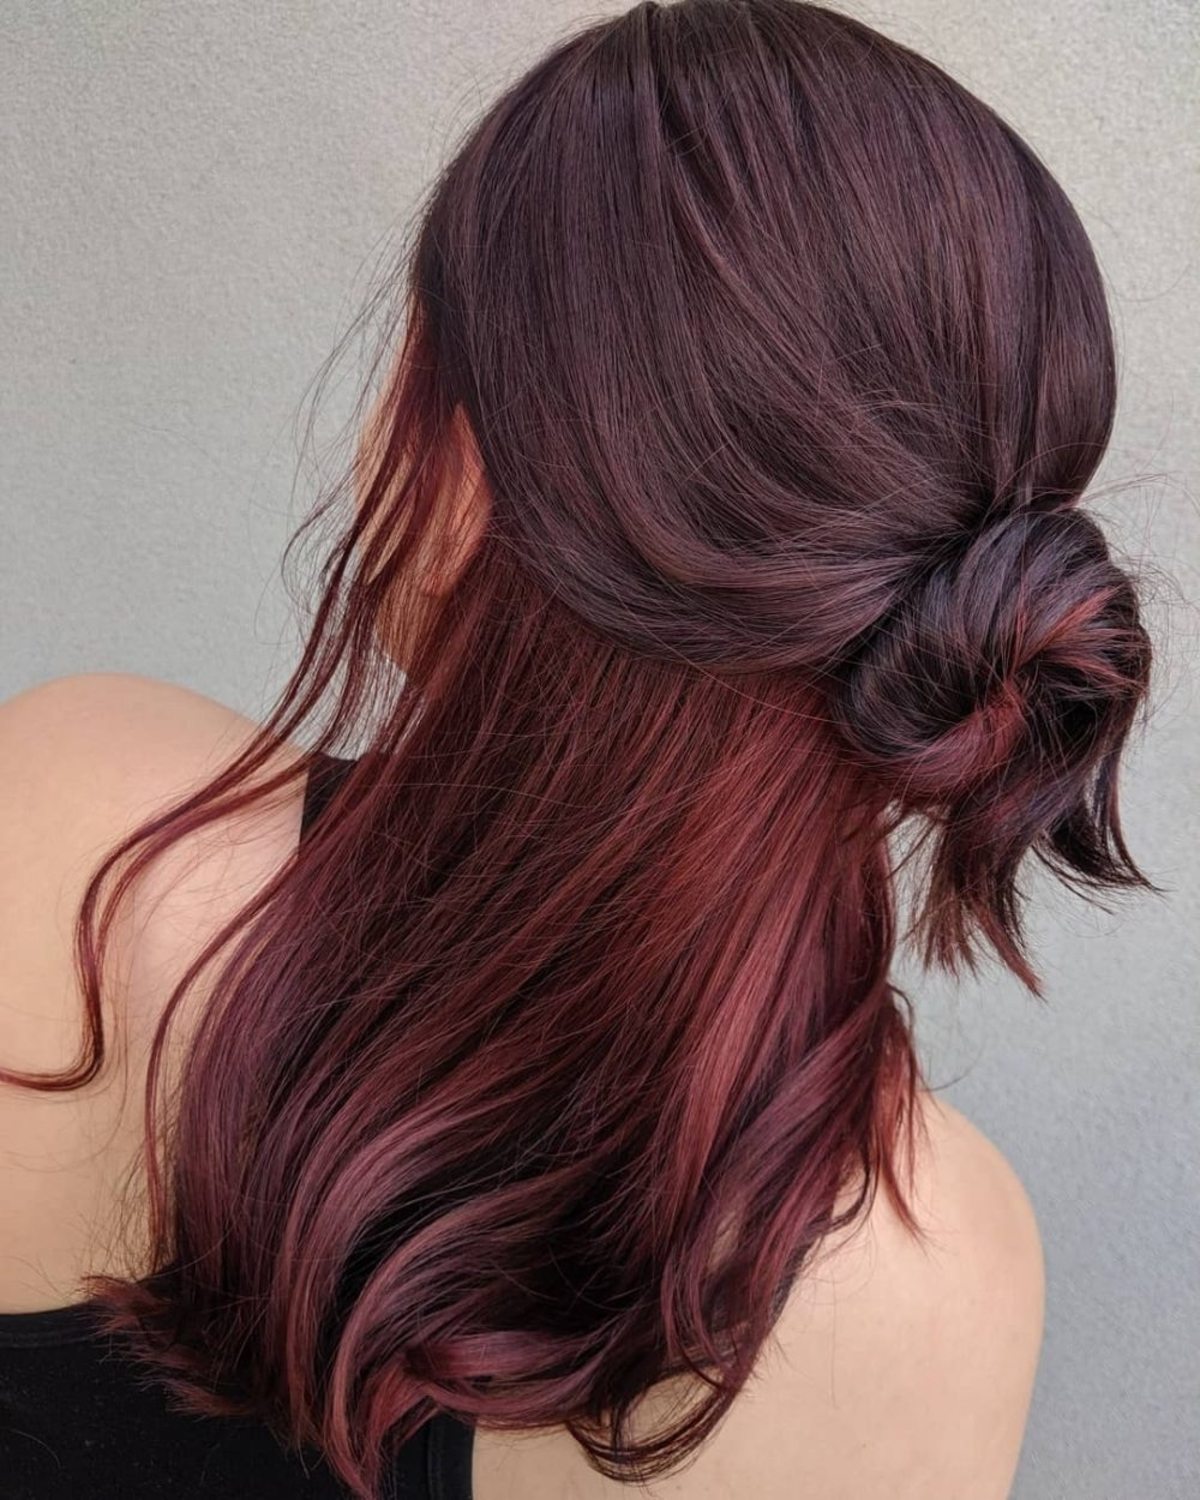 28 Trendy Ways to Pair Red Hair with Highlights (Photos)